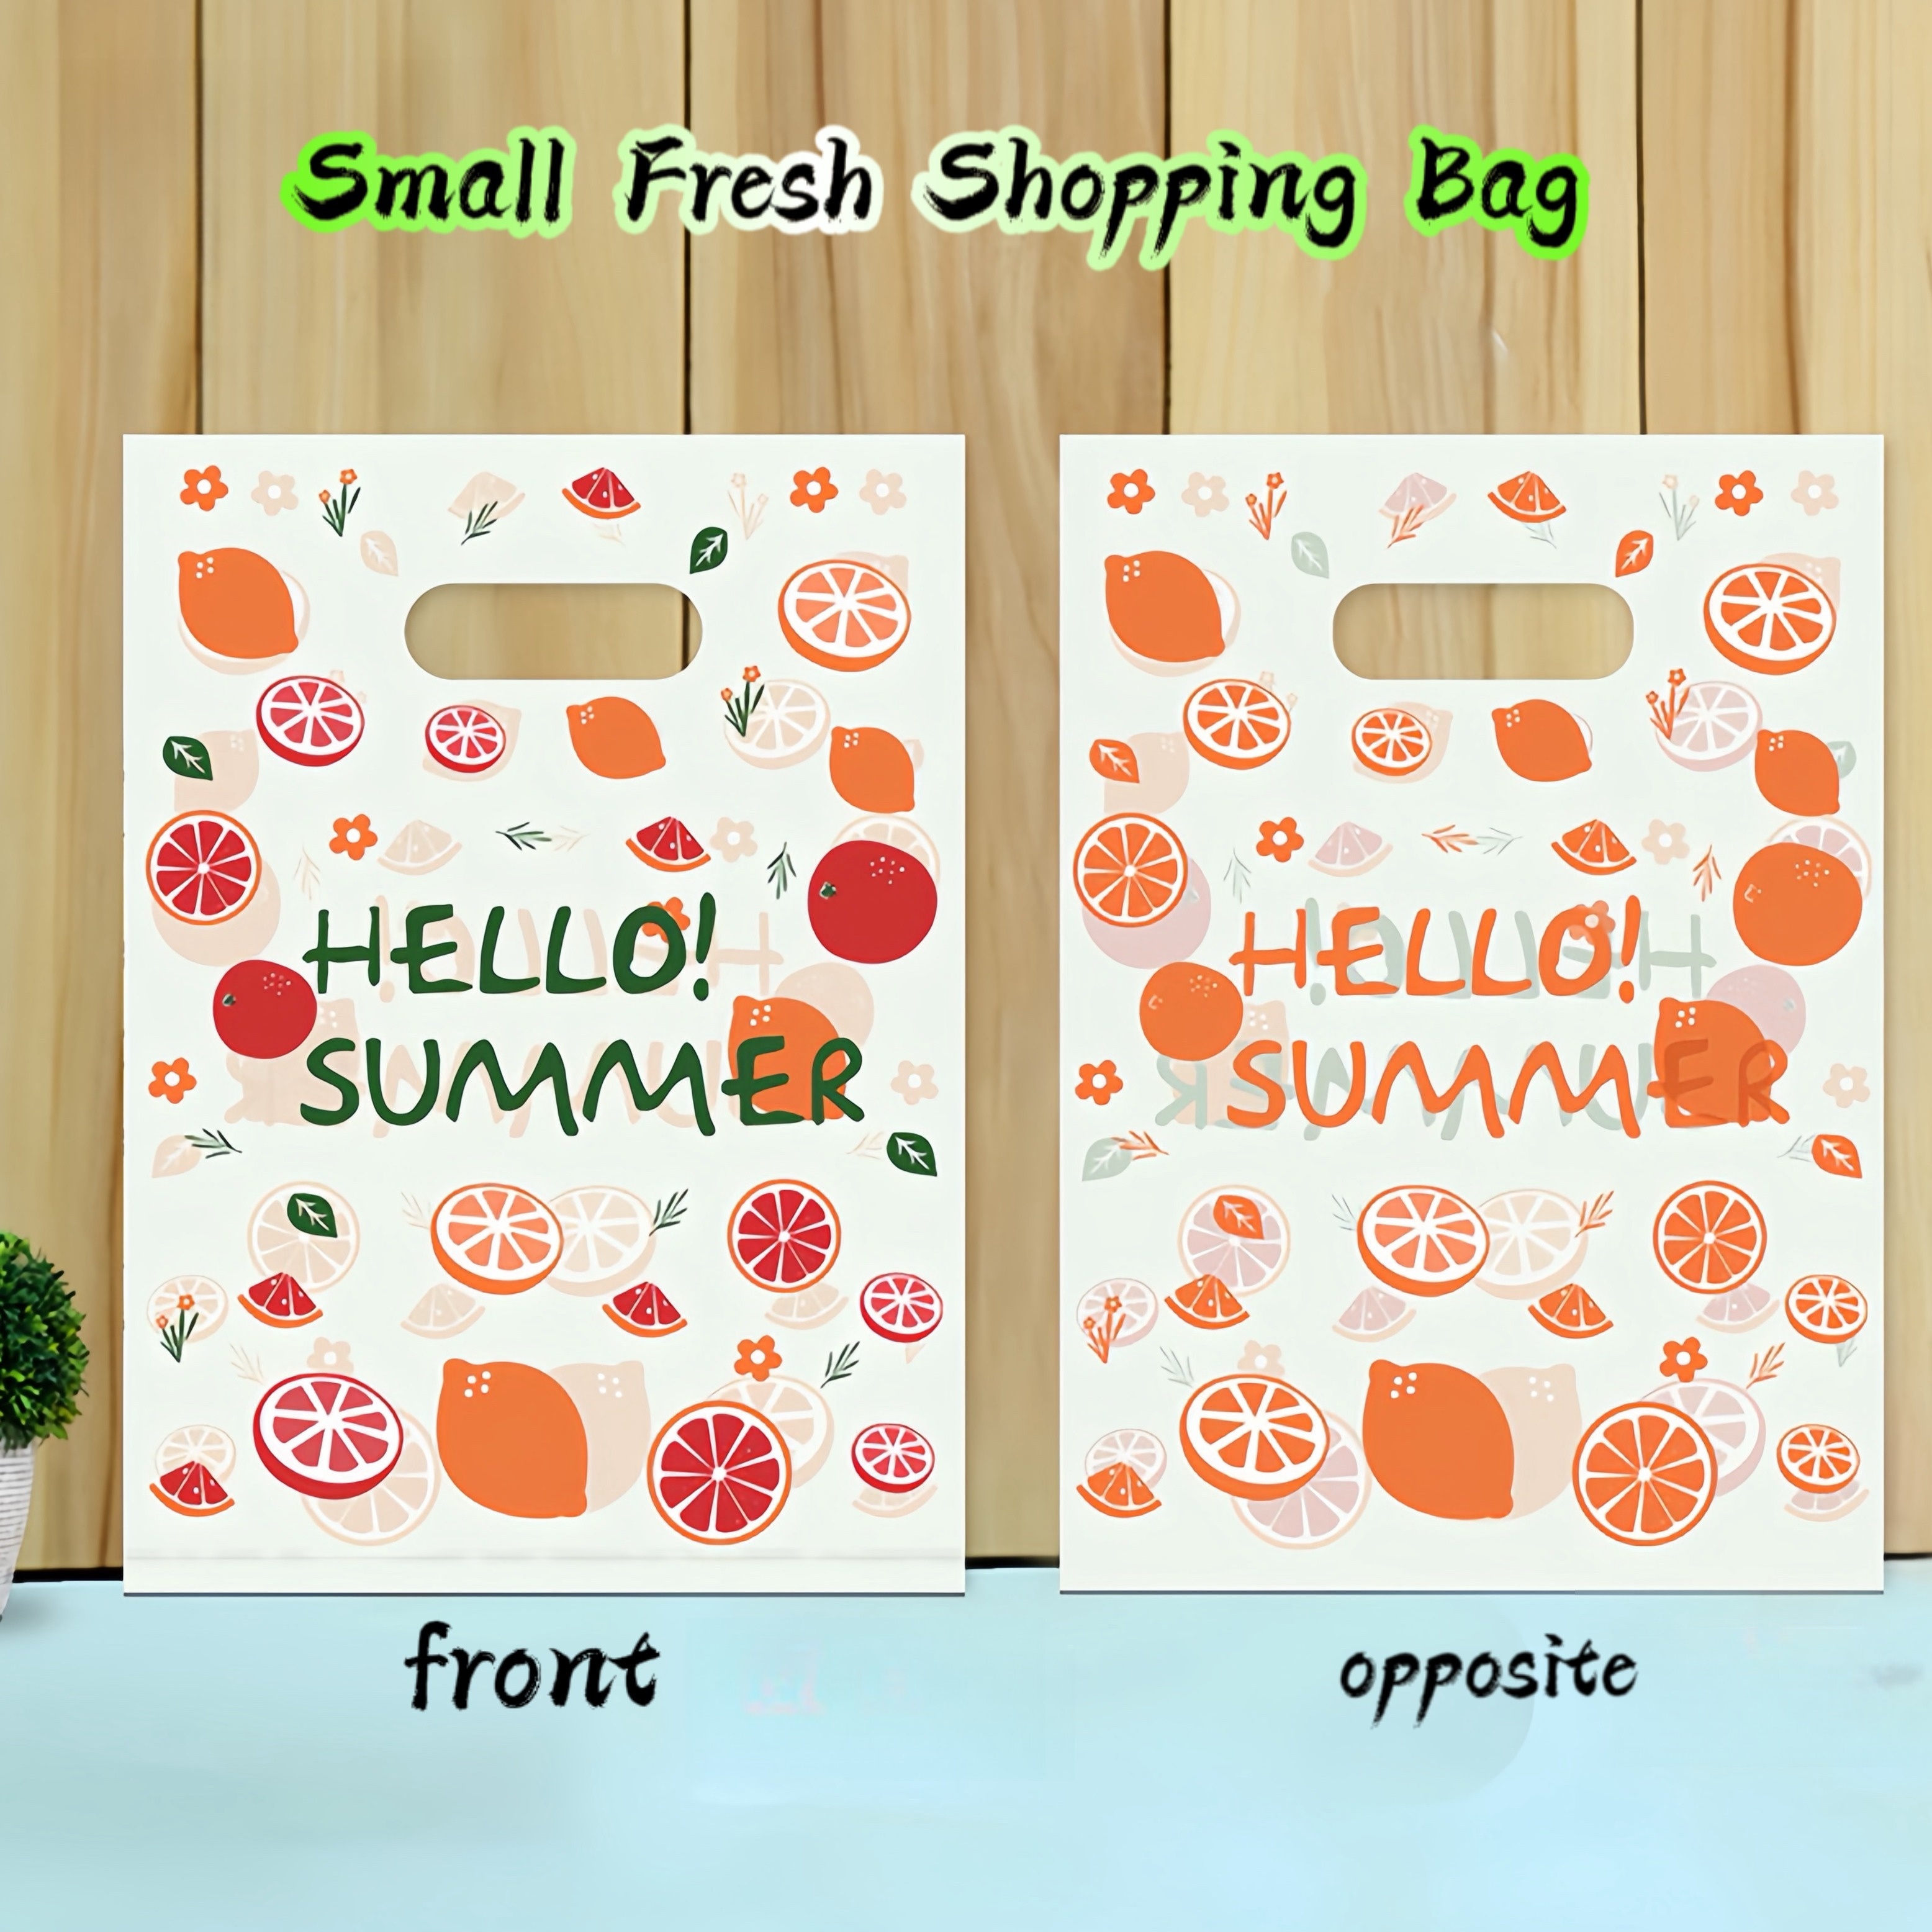 

1set Of 50pcs Bags, Jewelry Bags, Shopping Tote Bags, Boutique Shop Plastic Bags, Hand-held Clothing Bags, Gift Bags, Literary Small Fresh Bags, For Retail Stores